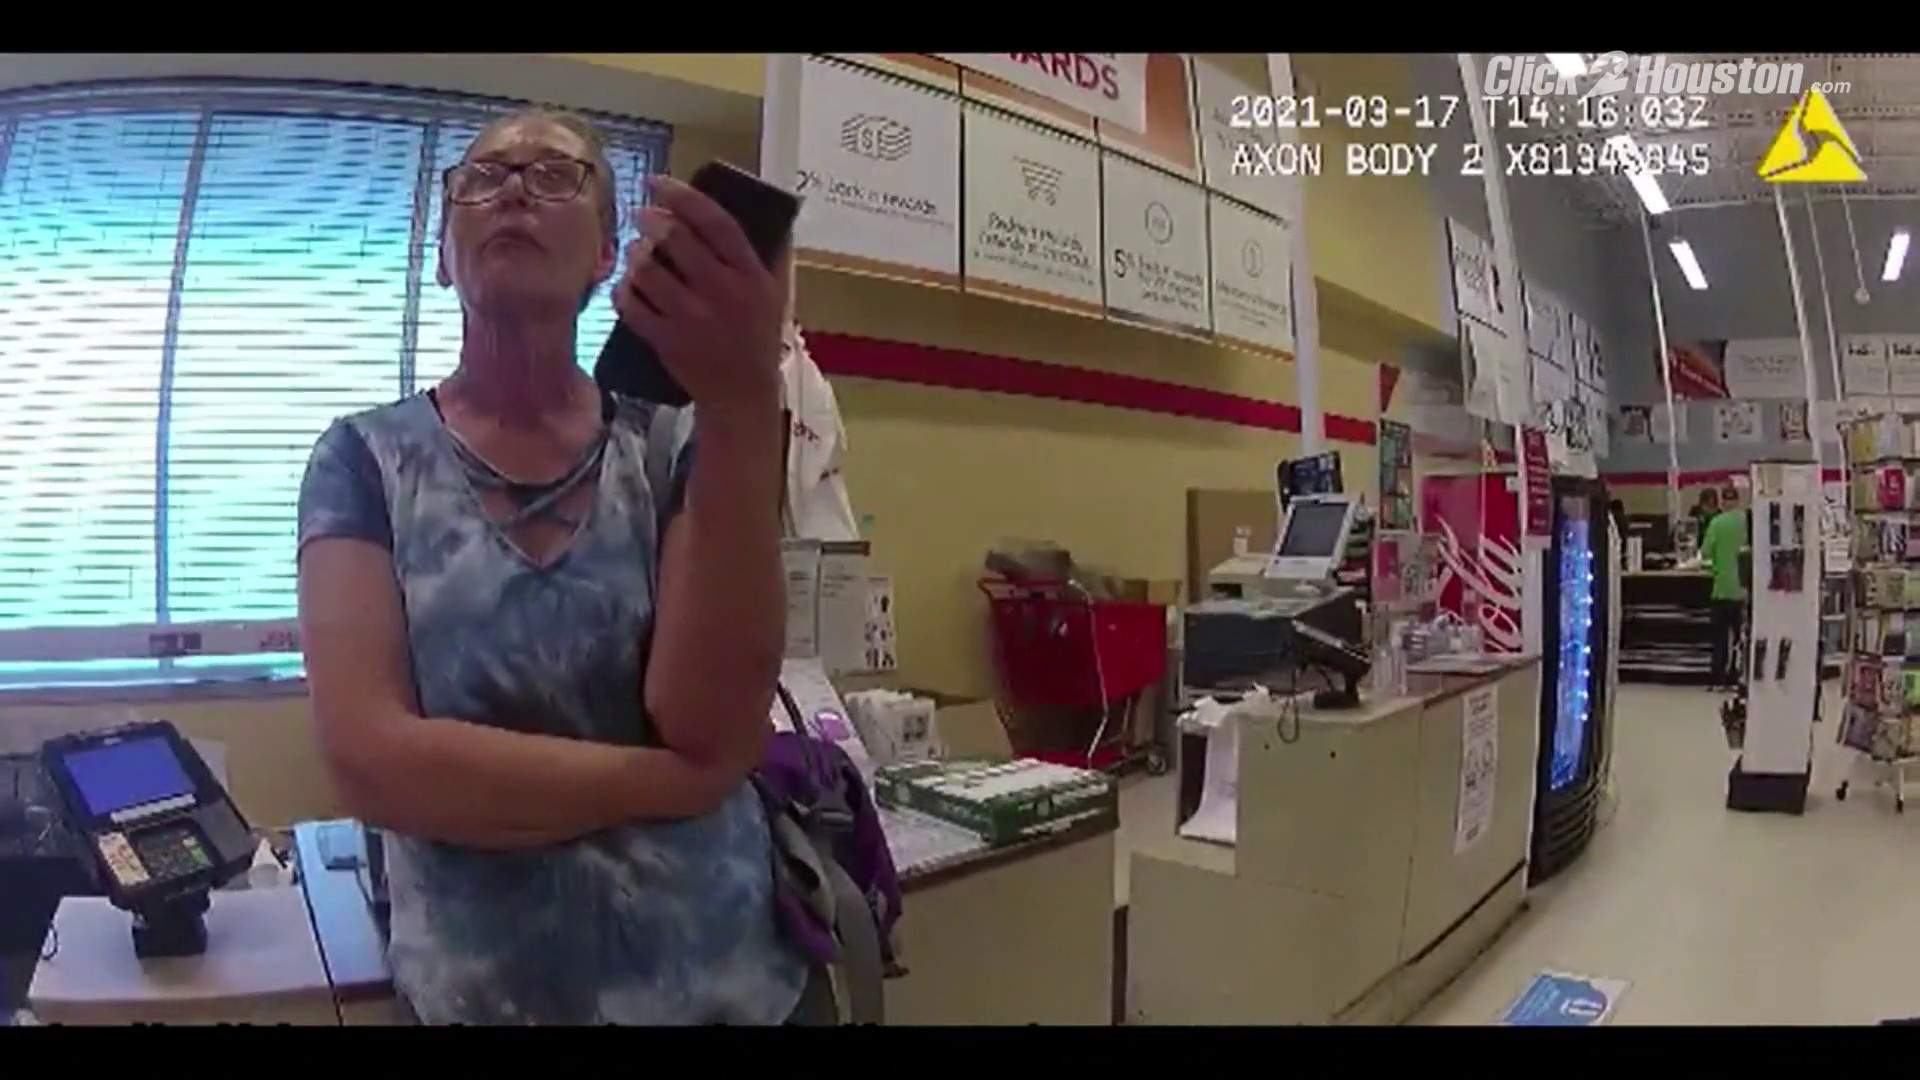 VIDEOS: Bodycam footage shows maskless woman’s 2nd arrest, this time at Texas City store